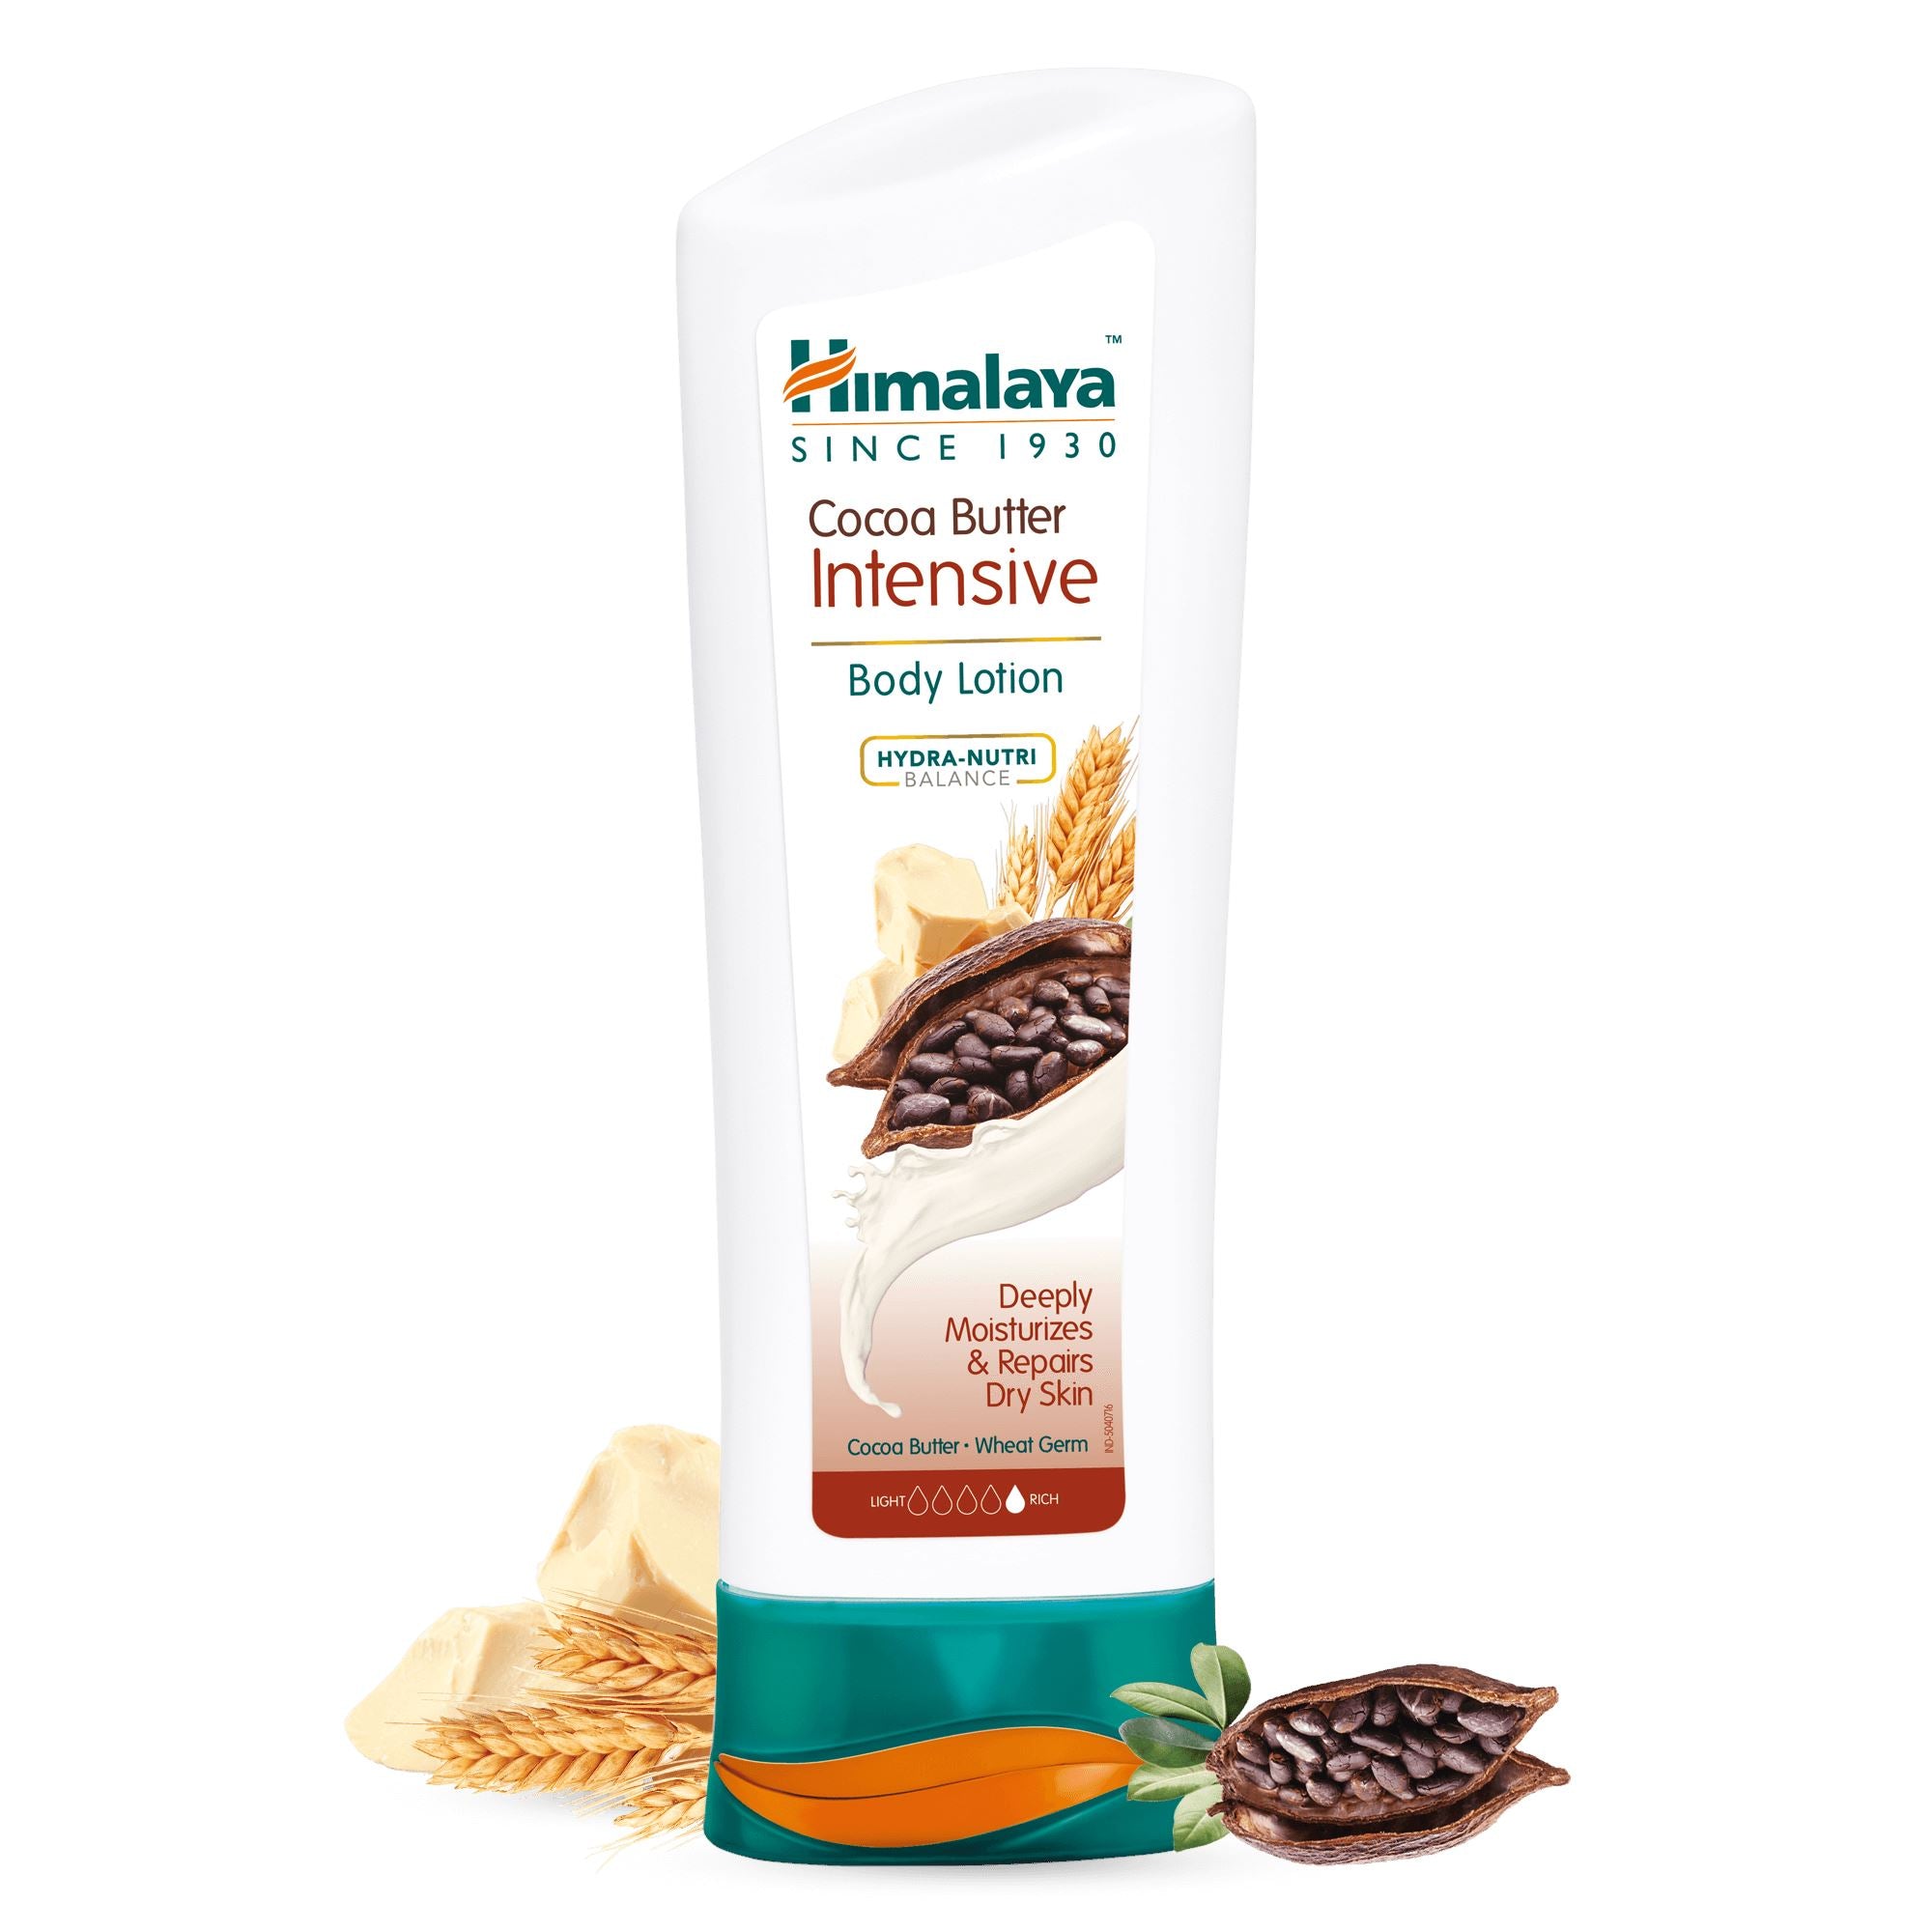 Himalaya Cocoa Butter Intensive Body Lotion - Deeply moisturizes and repairs dry skin